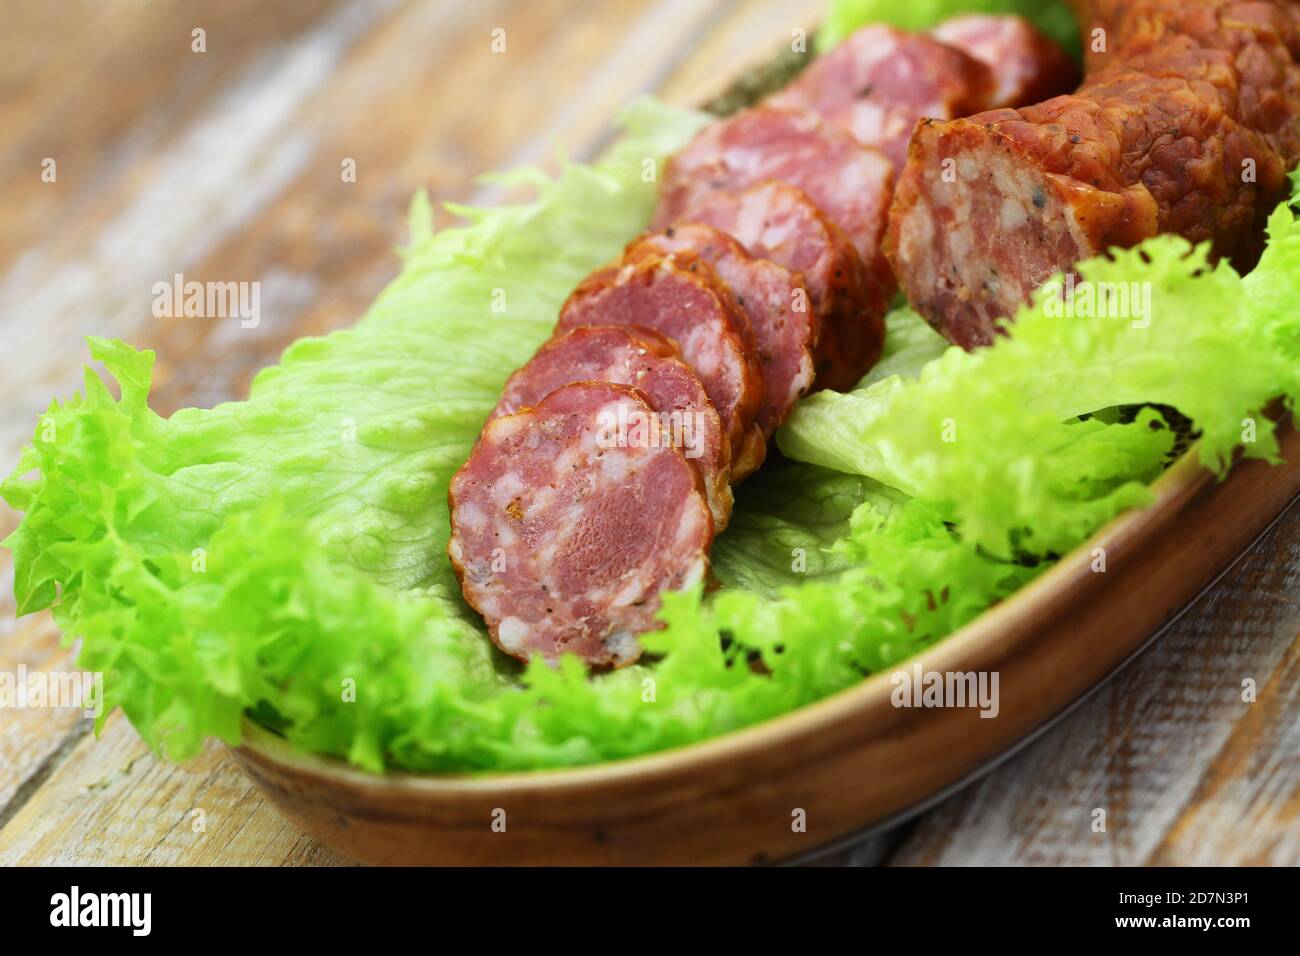 Slices of smoked pork sausage on lettuce leaves, closeup Stock Photo